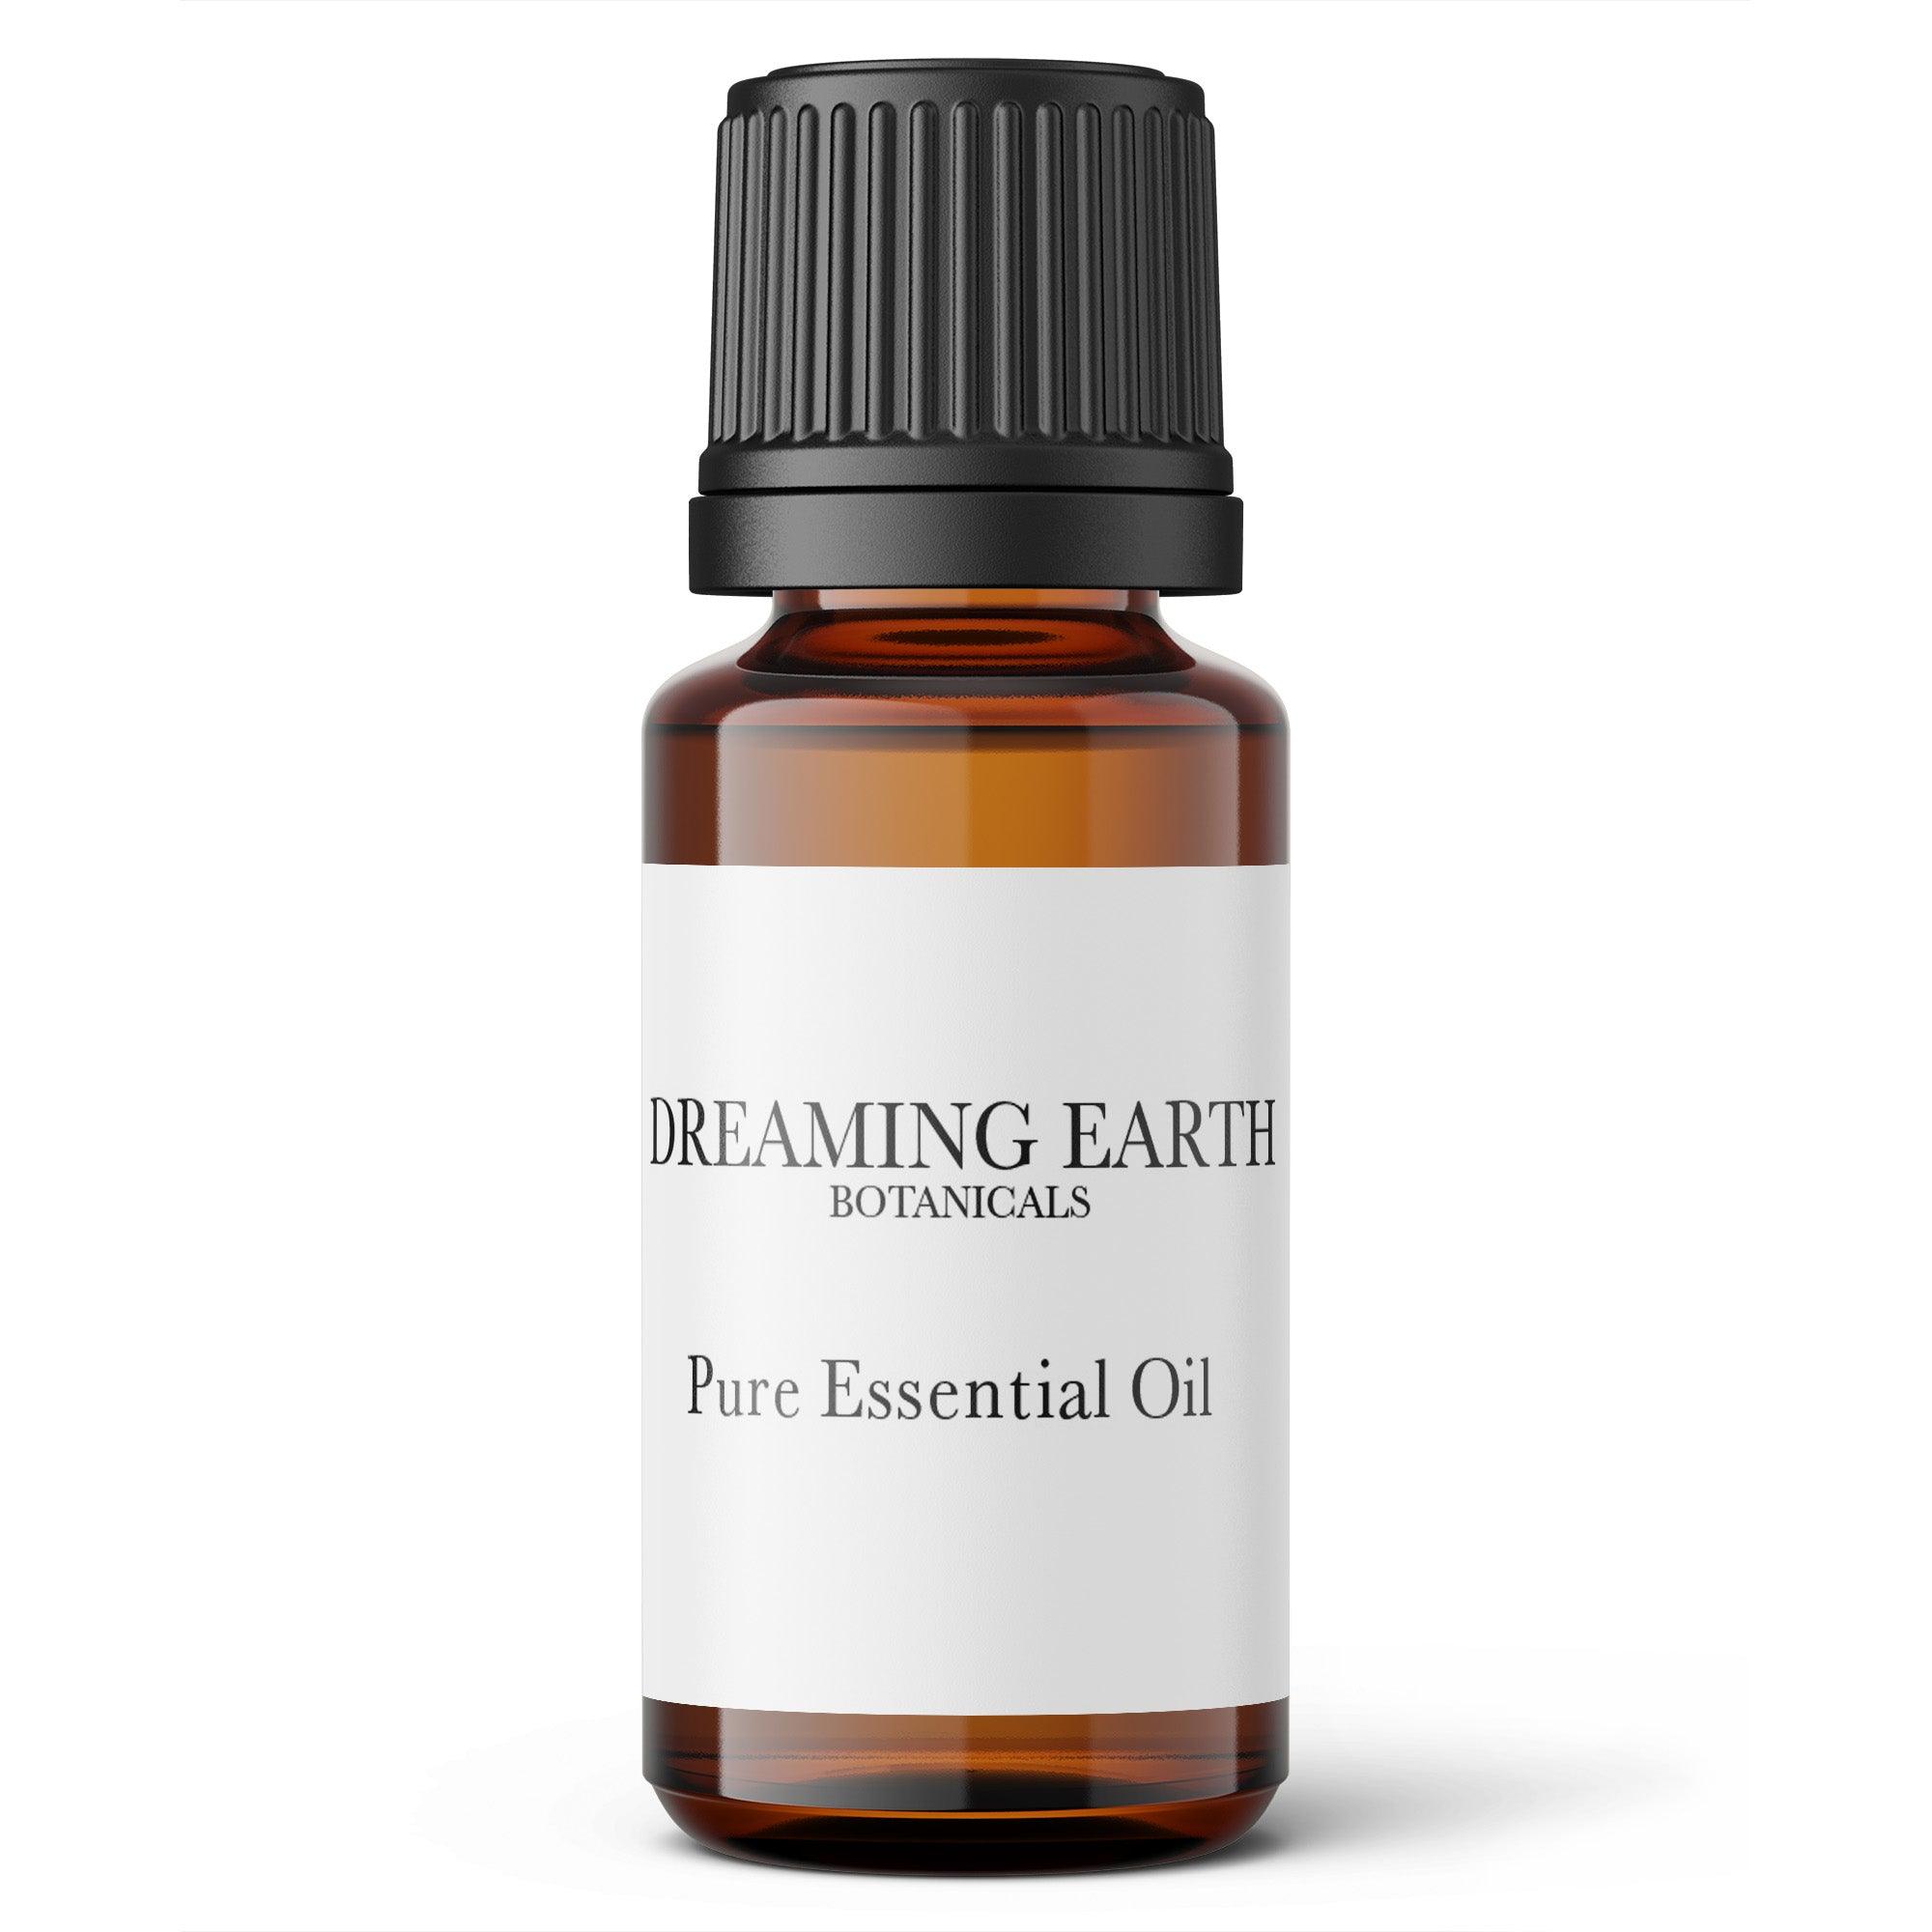 Load image into Gallery viewer, Coriander Essential Oil - Dreaming Earth Inc
